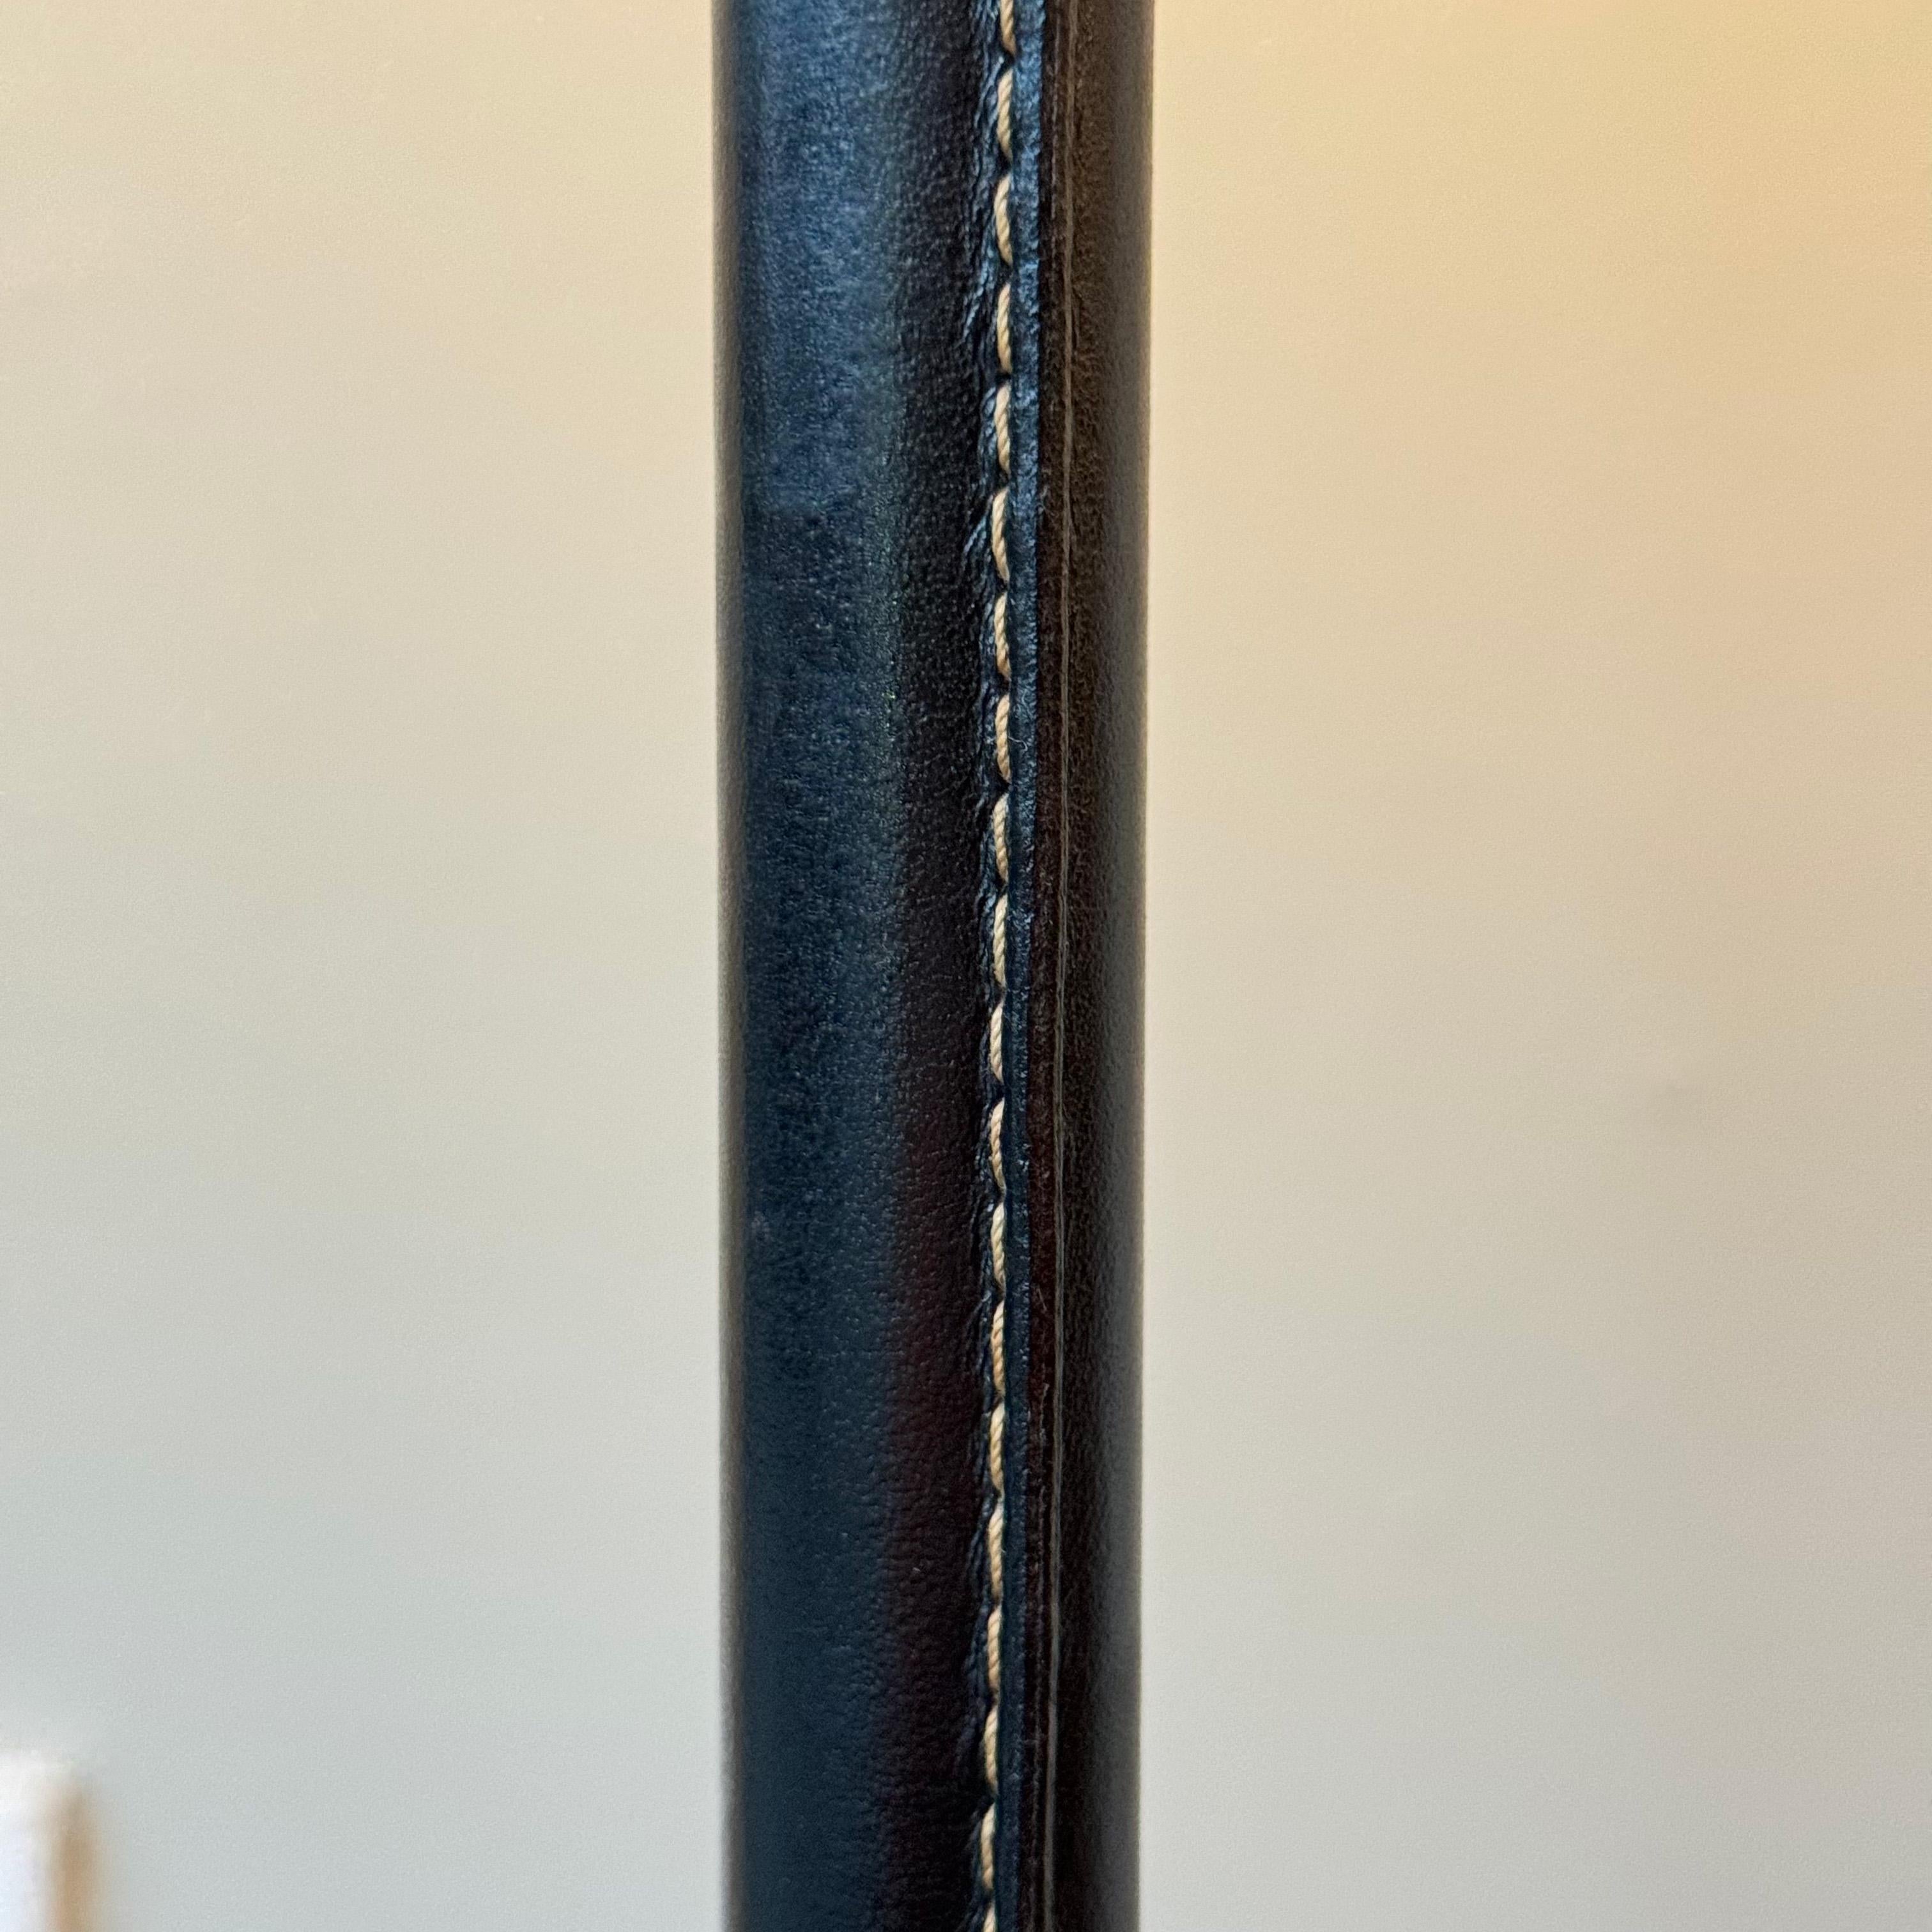 Brass Floor Lamp No. 7071 Falkenbergs belysning In Good Condition For Sale In London, GB